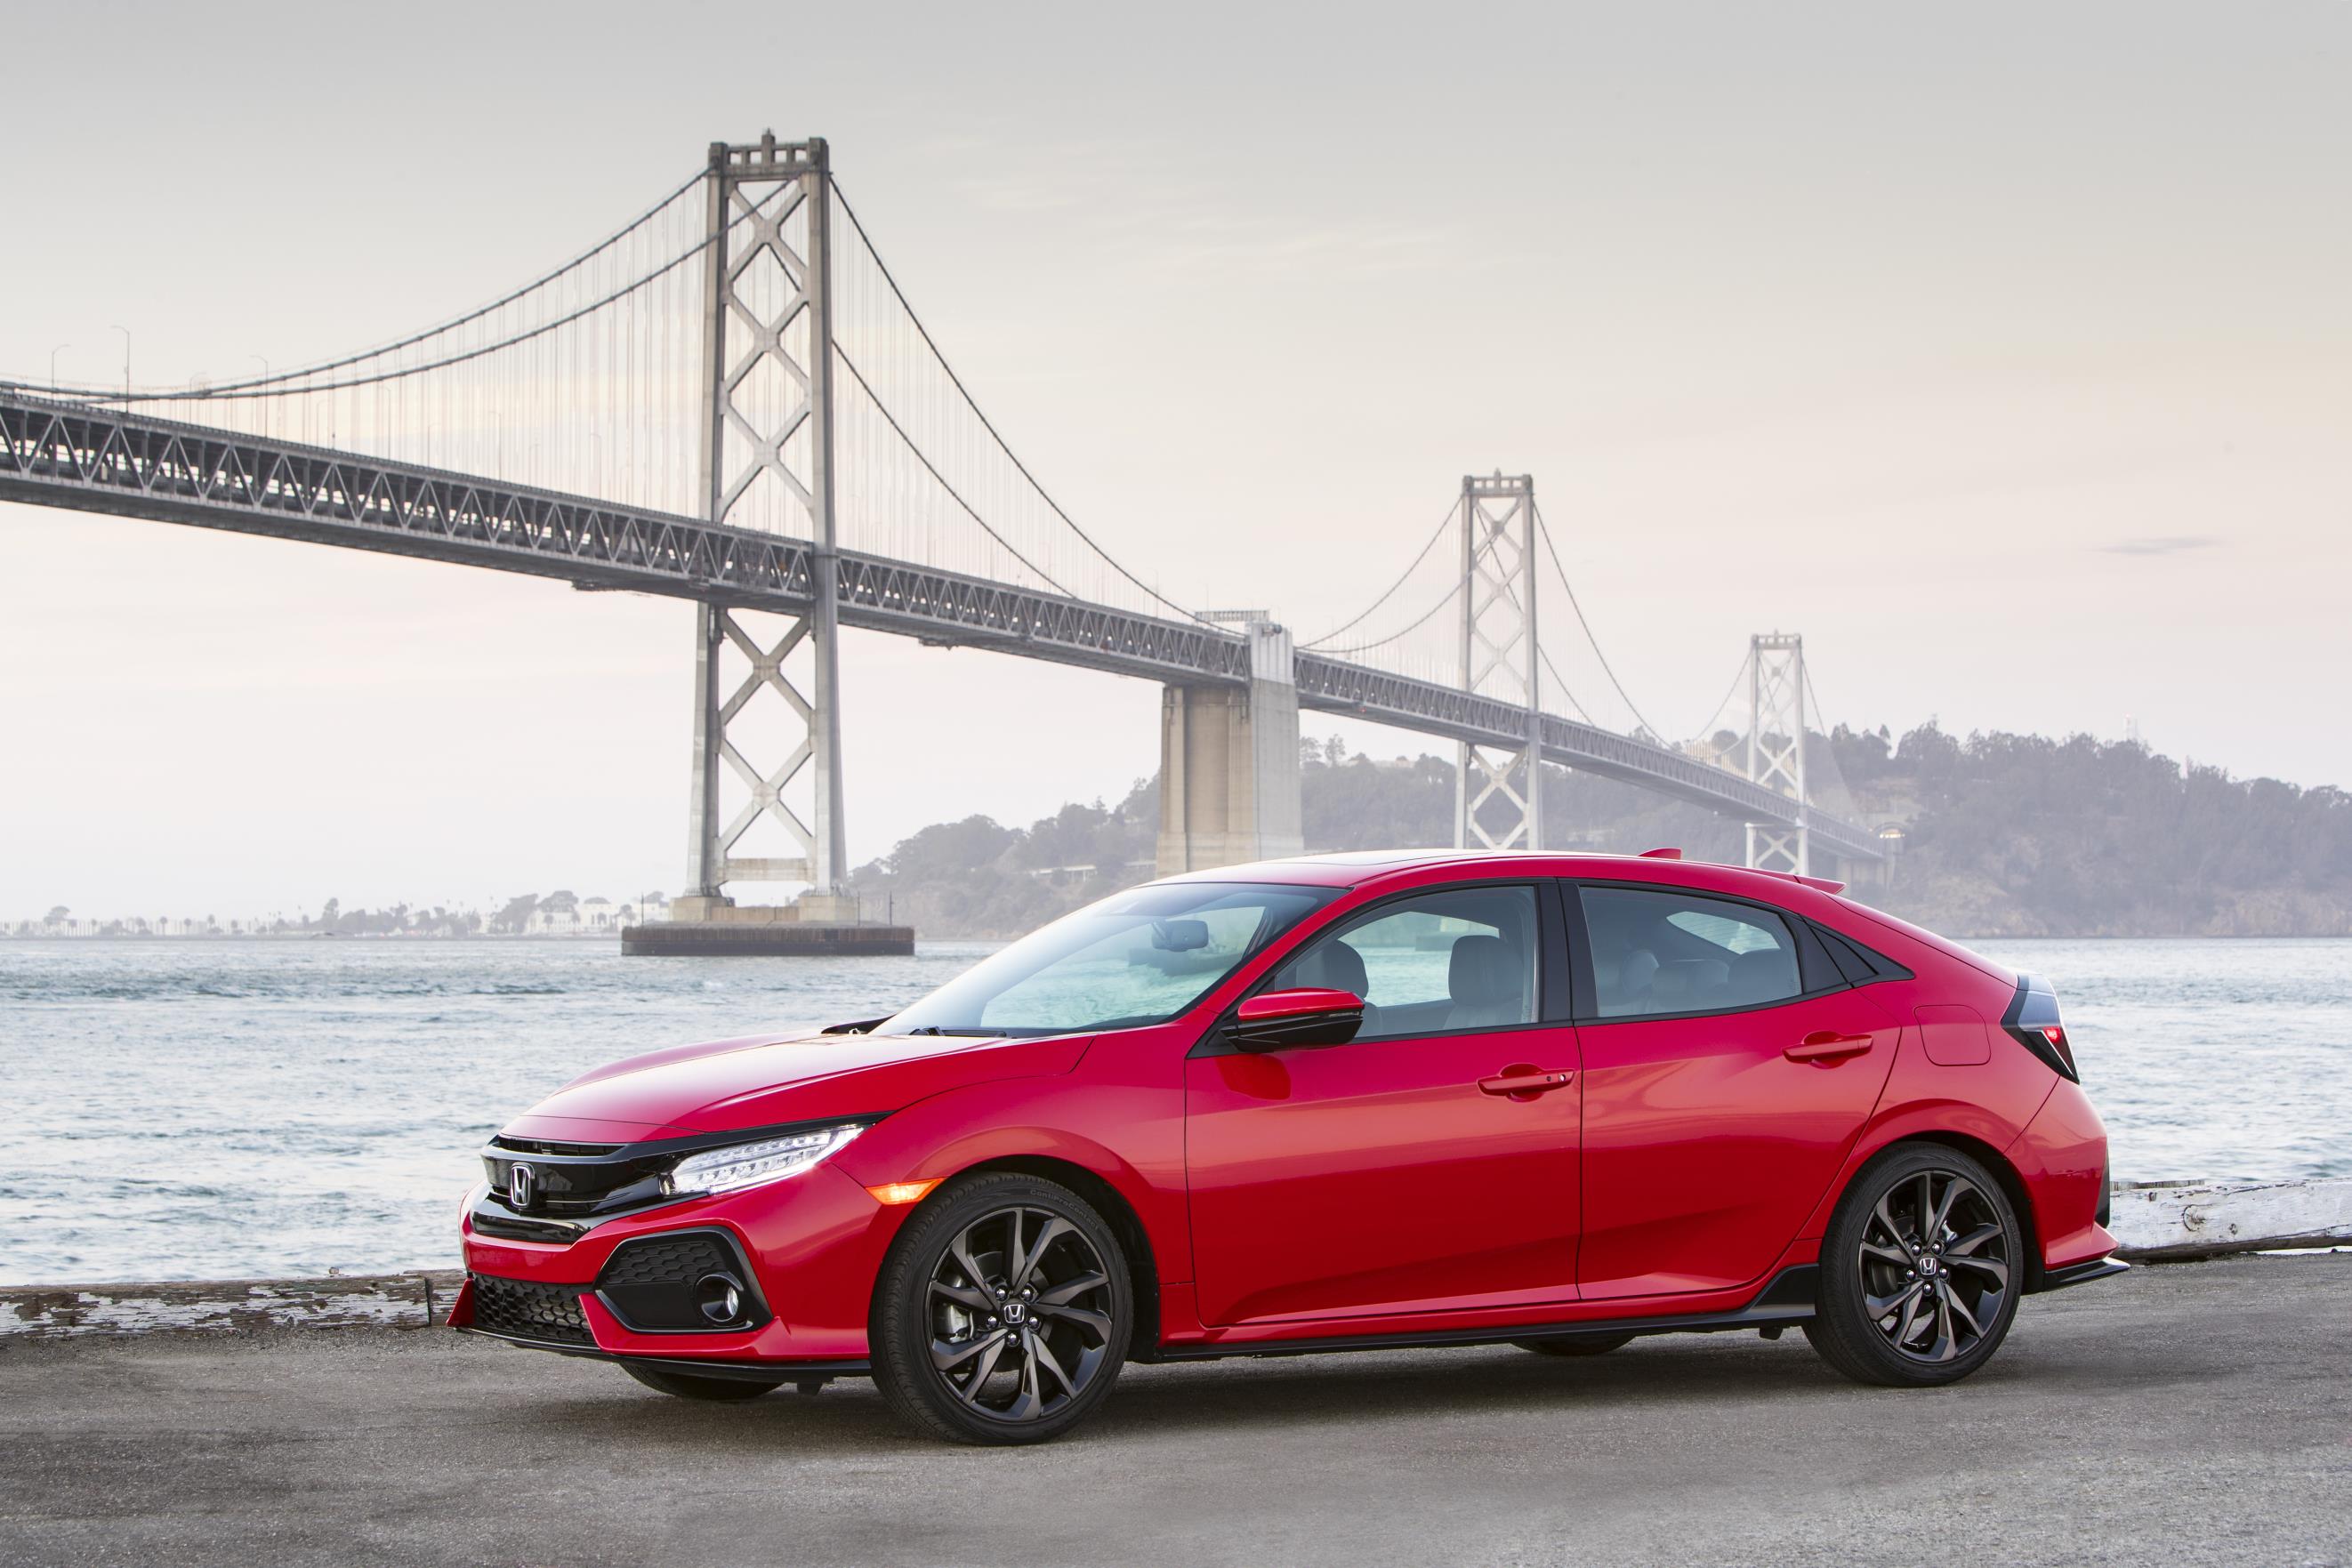 2017 Honda Civic Hatchback Arrives in America, Specs and Pricing